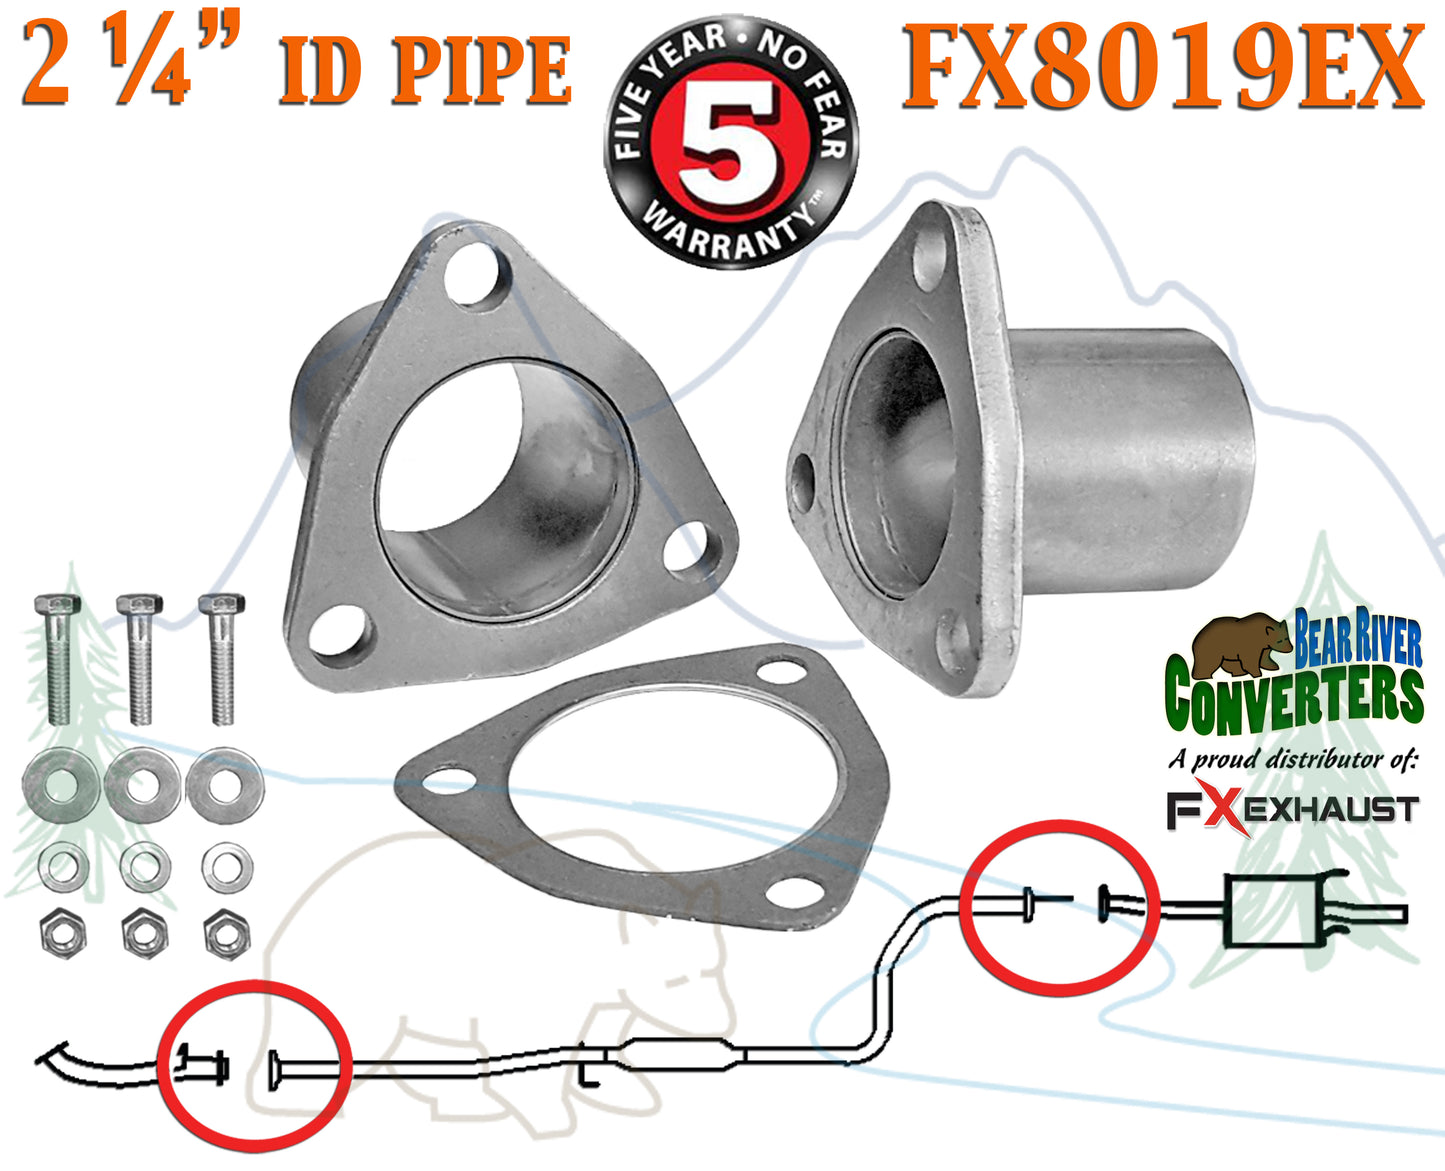 FX8019EX 2 1/4" ID Universal QuickFix Exhaust Triangle Flange Repair Pipe Kit